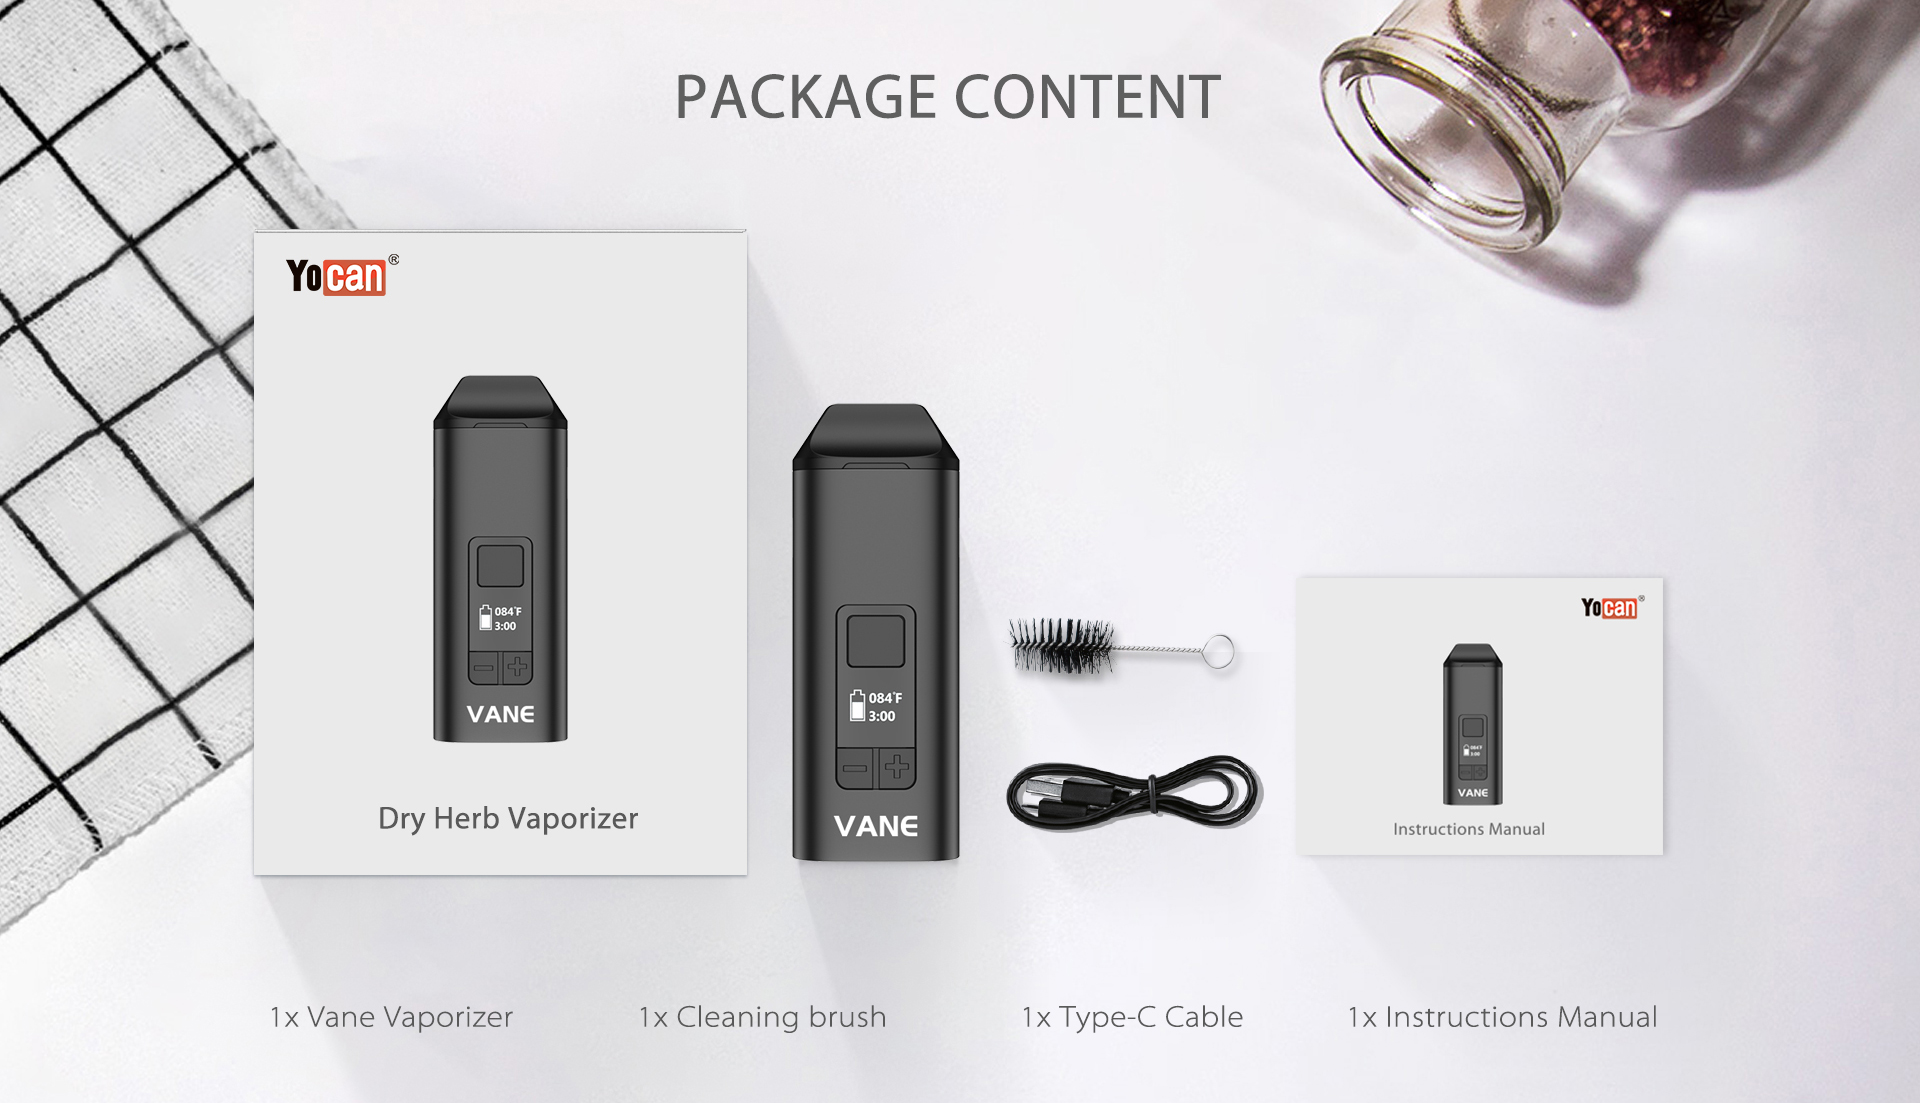 Yocan Vane Dry Vaporizer package content.